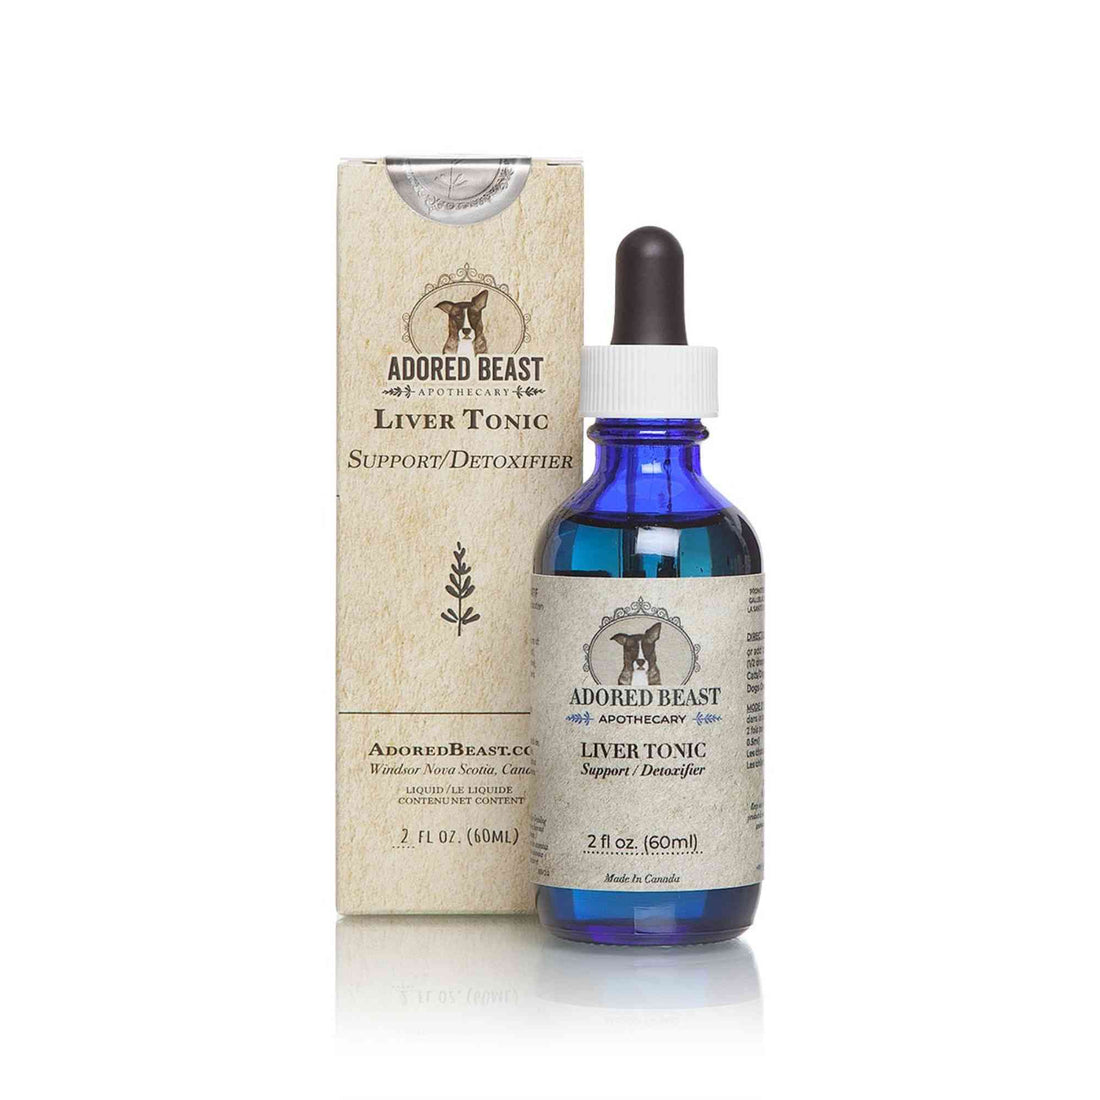 Liver Tonic 60ml Adored Beast Detox Support Cats and Dogs